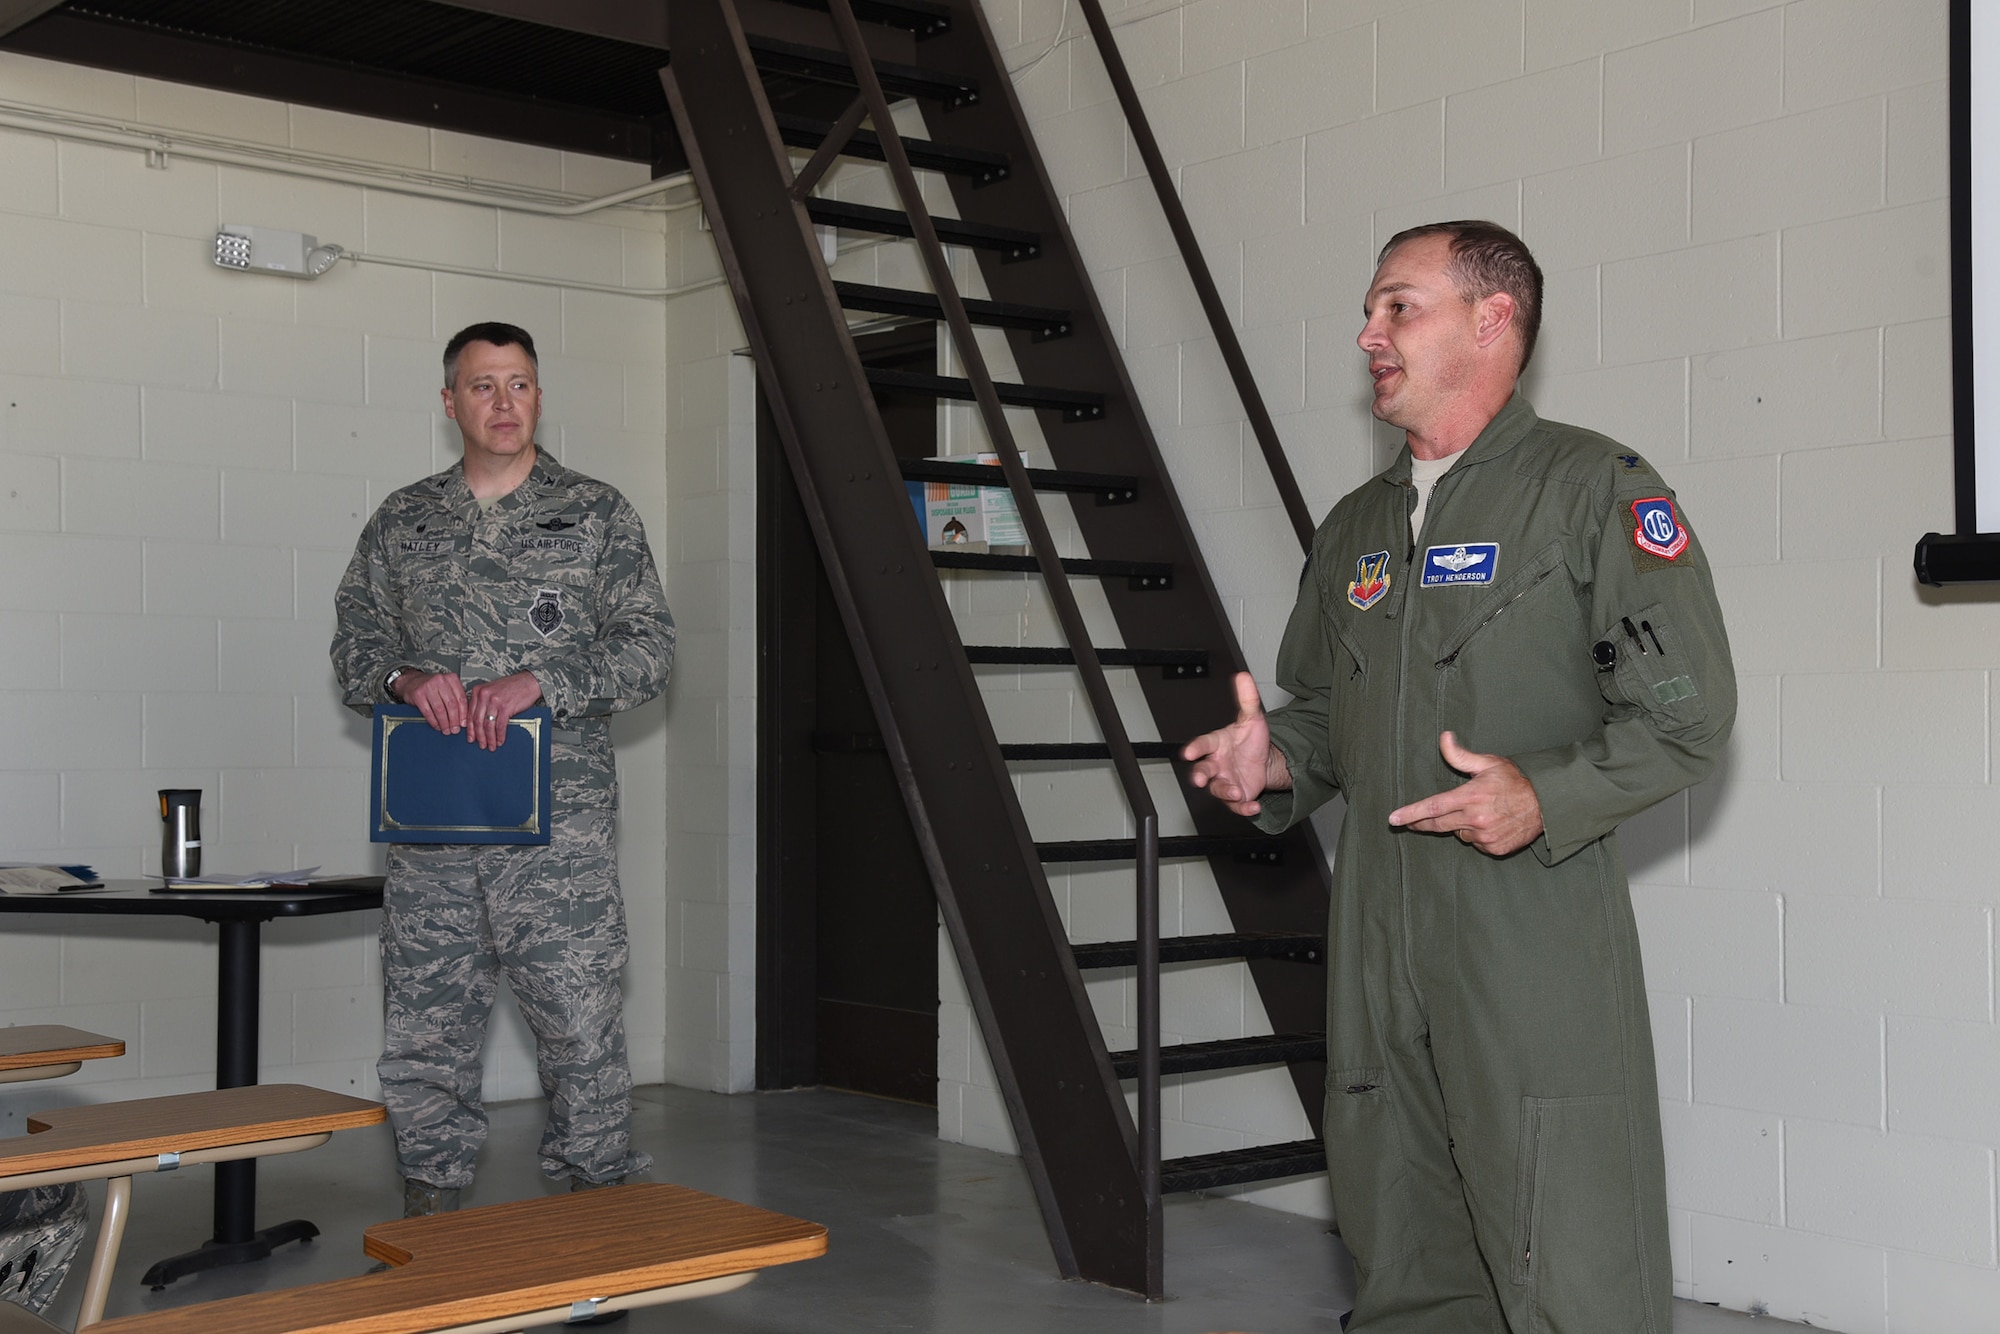 Col. Troy Henderson, the Air Combat Command (ACC) inspector general team chief, right, speaks to a group of 119th Logistics Readiness Squadron personnel as Col. Britt Hatley, the 119th Wing commander looks on during a unit effectiveness inspection (UEI) at the North Dakota Air National Guard Base, Fargo, N.D., May 20, 2018.